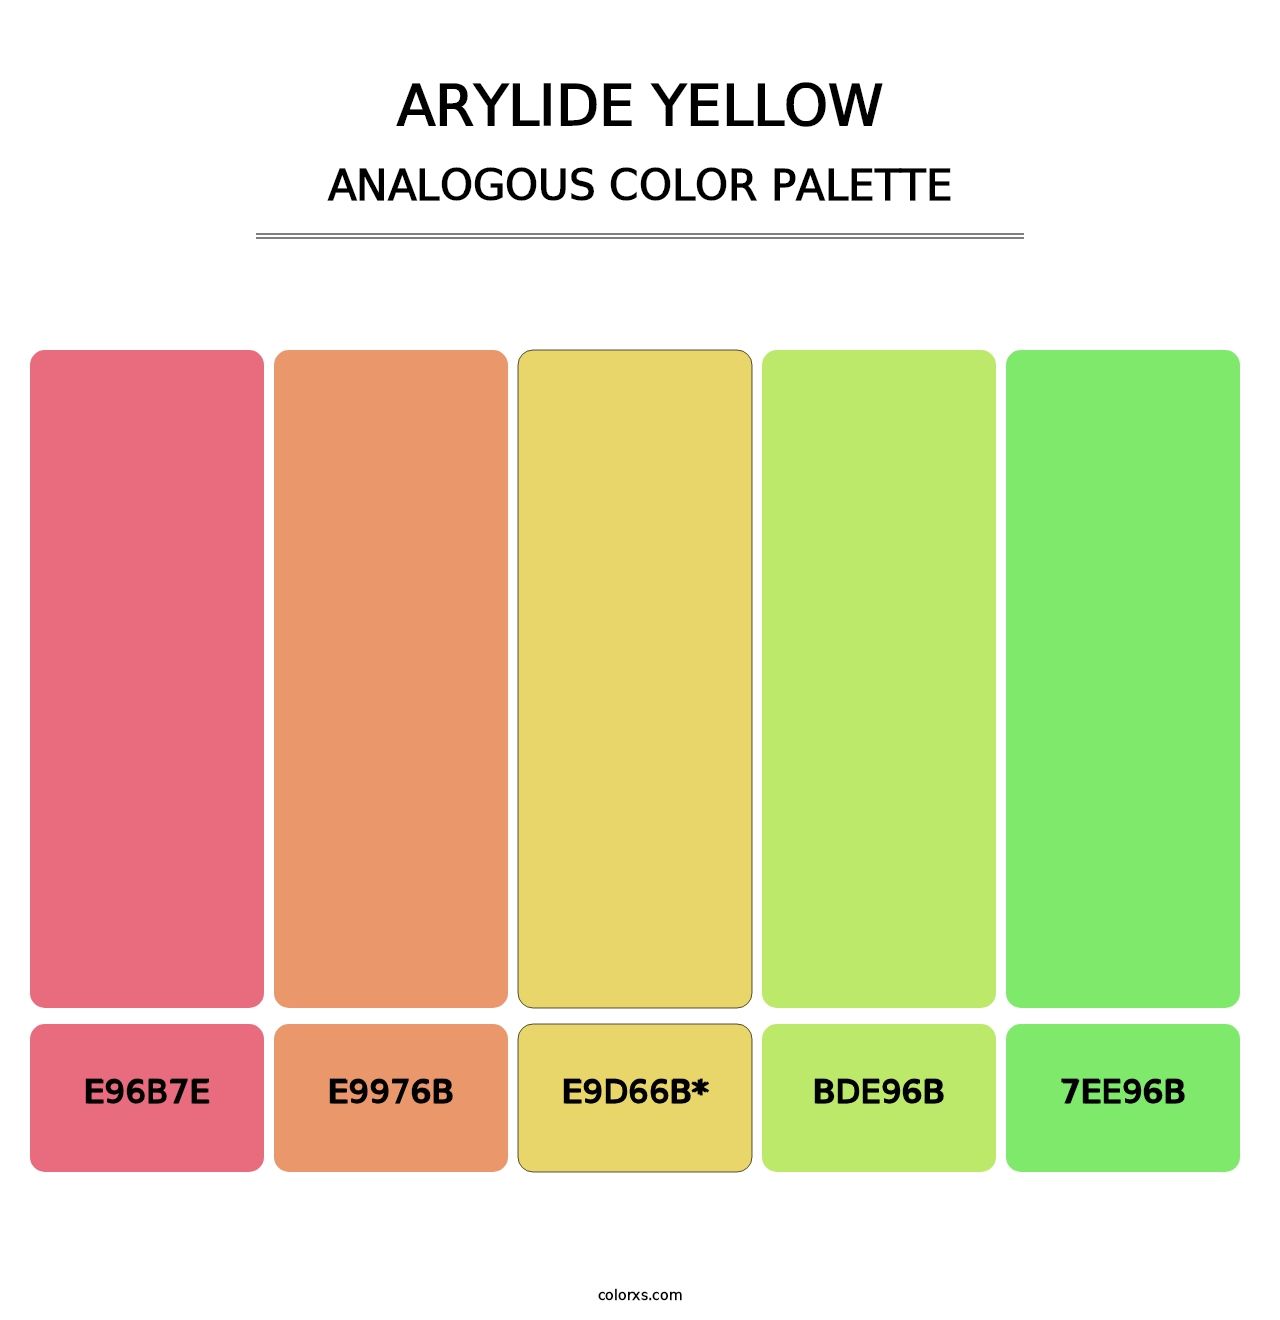 Arylide Yellow - Analogous Color Palette